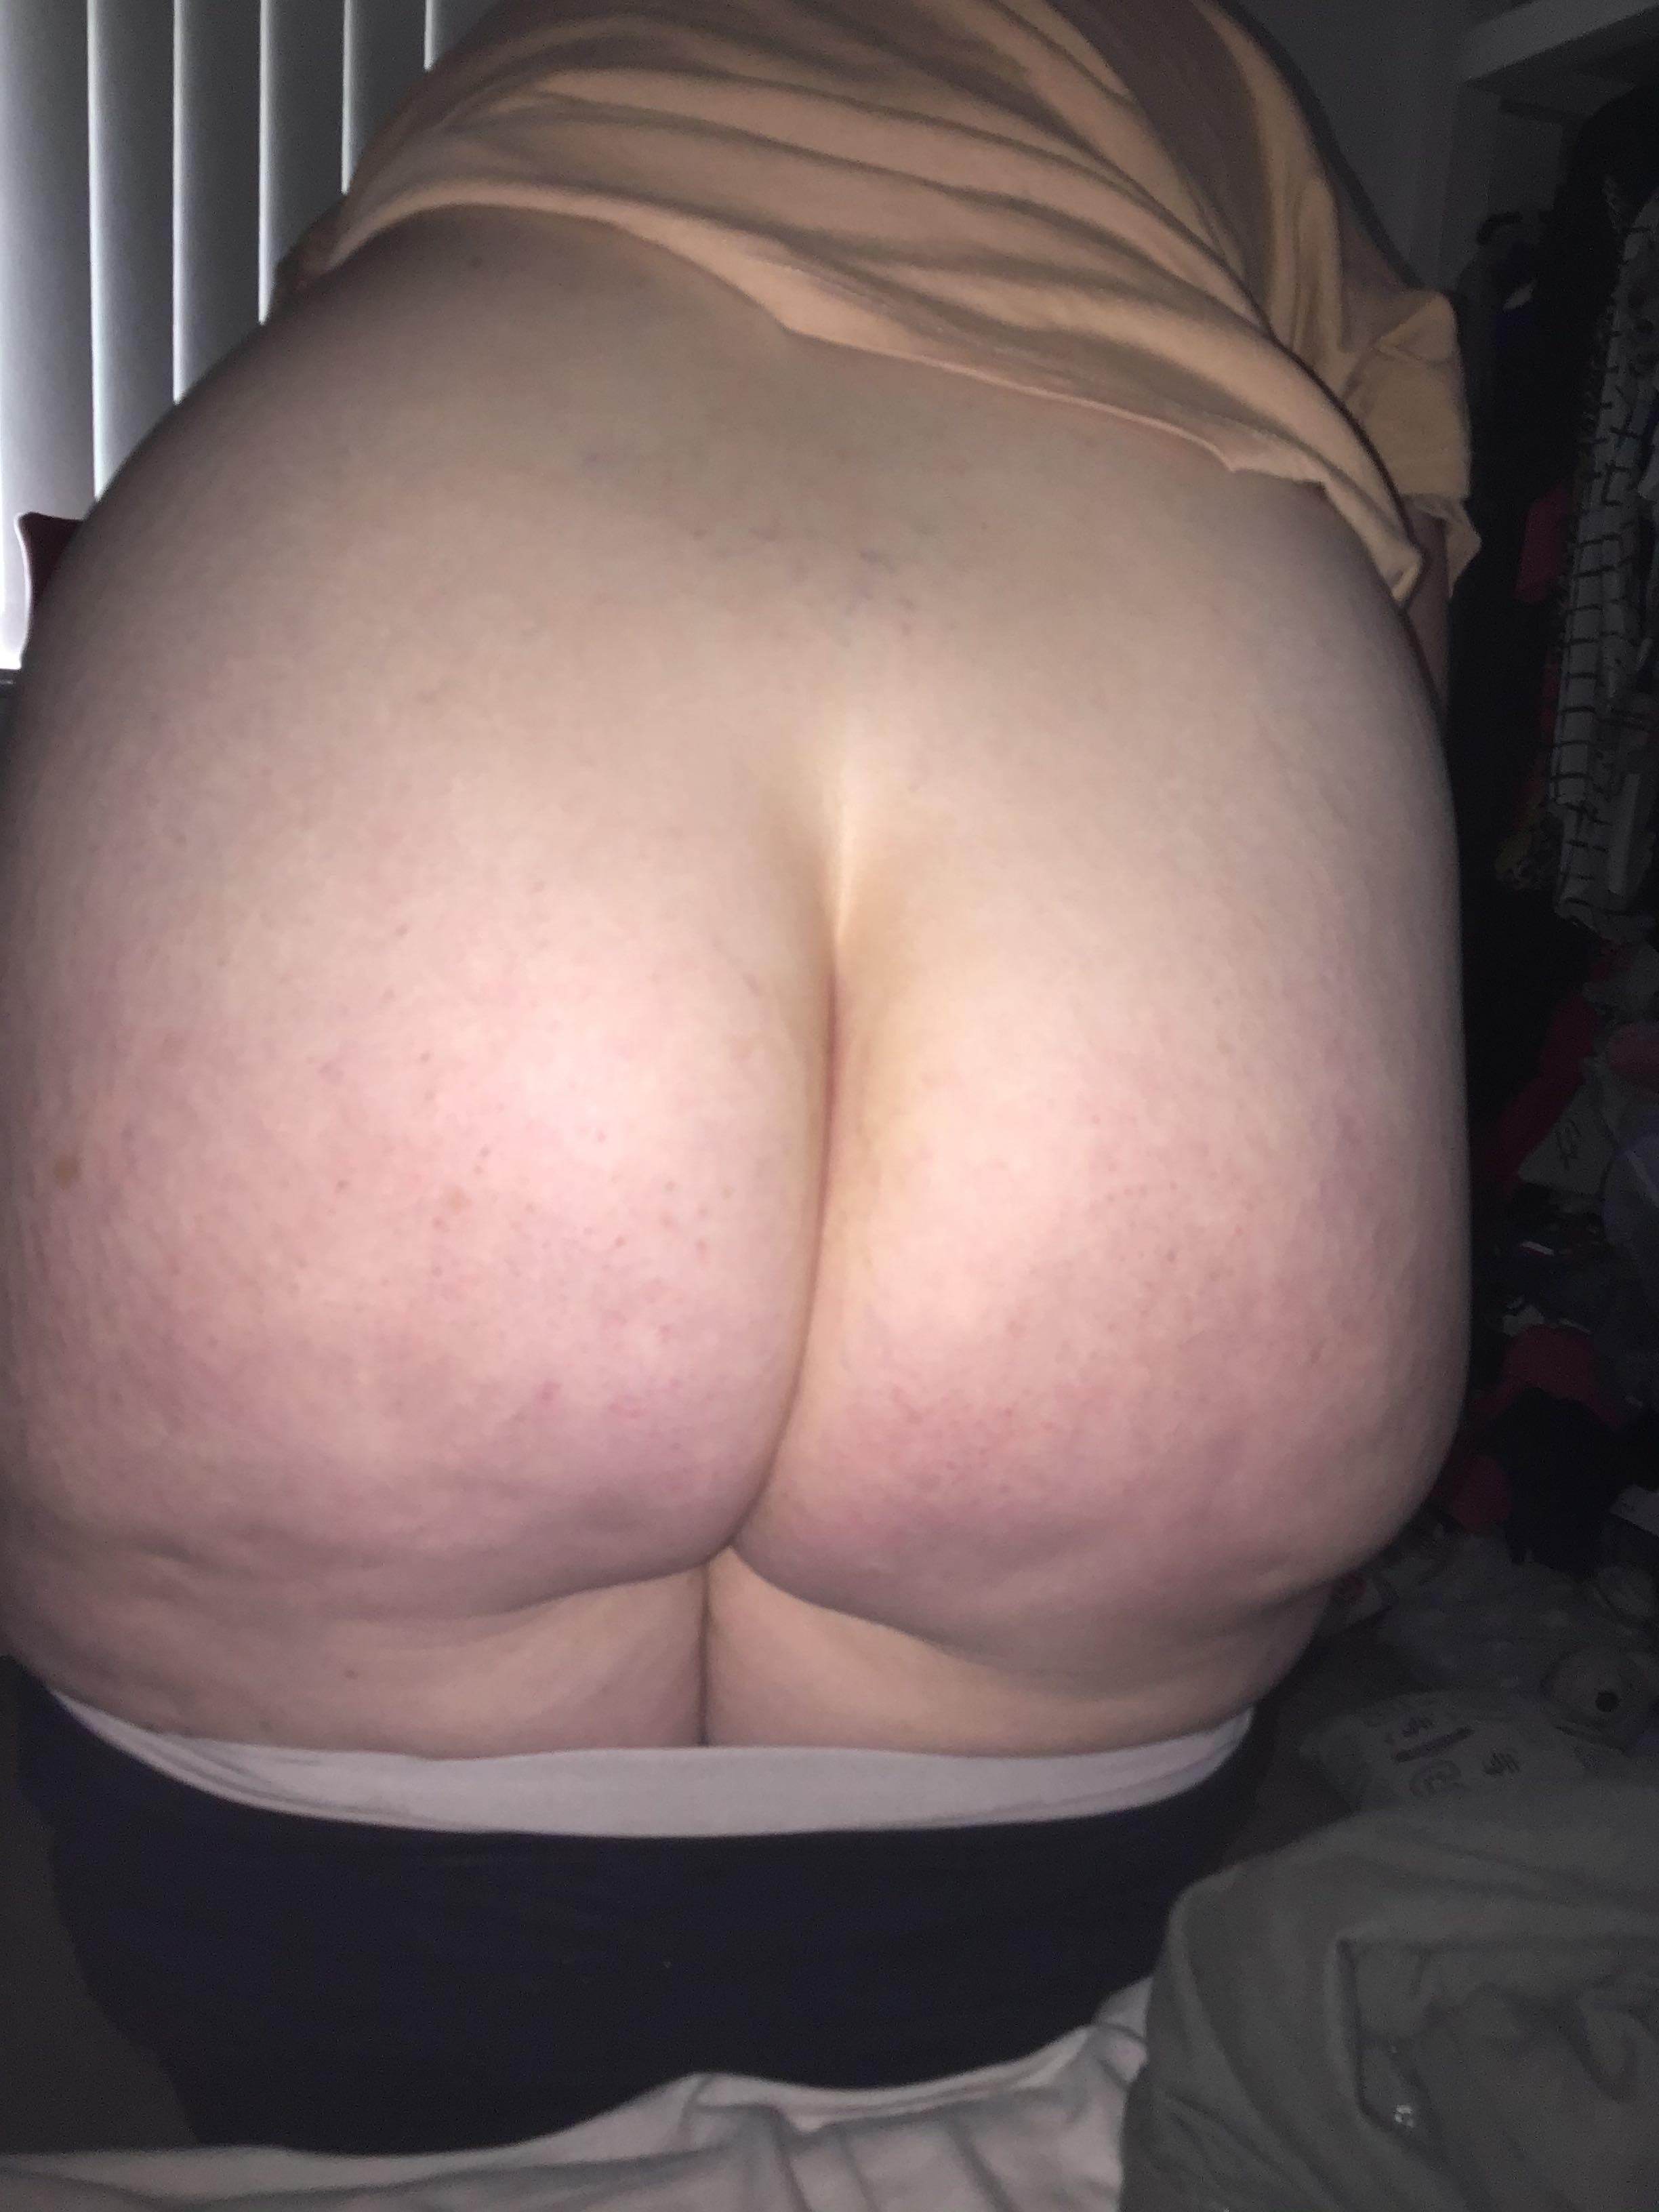 Wifes big sexy ass and pussy (61 pictures)